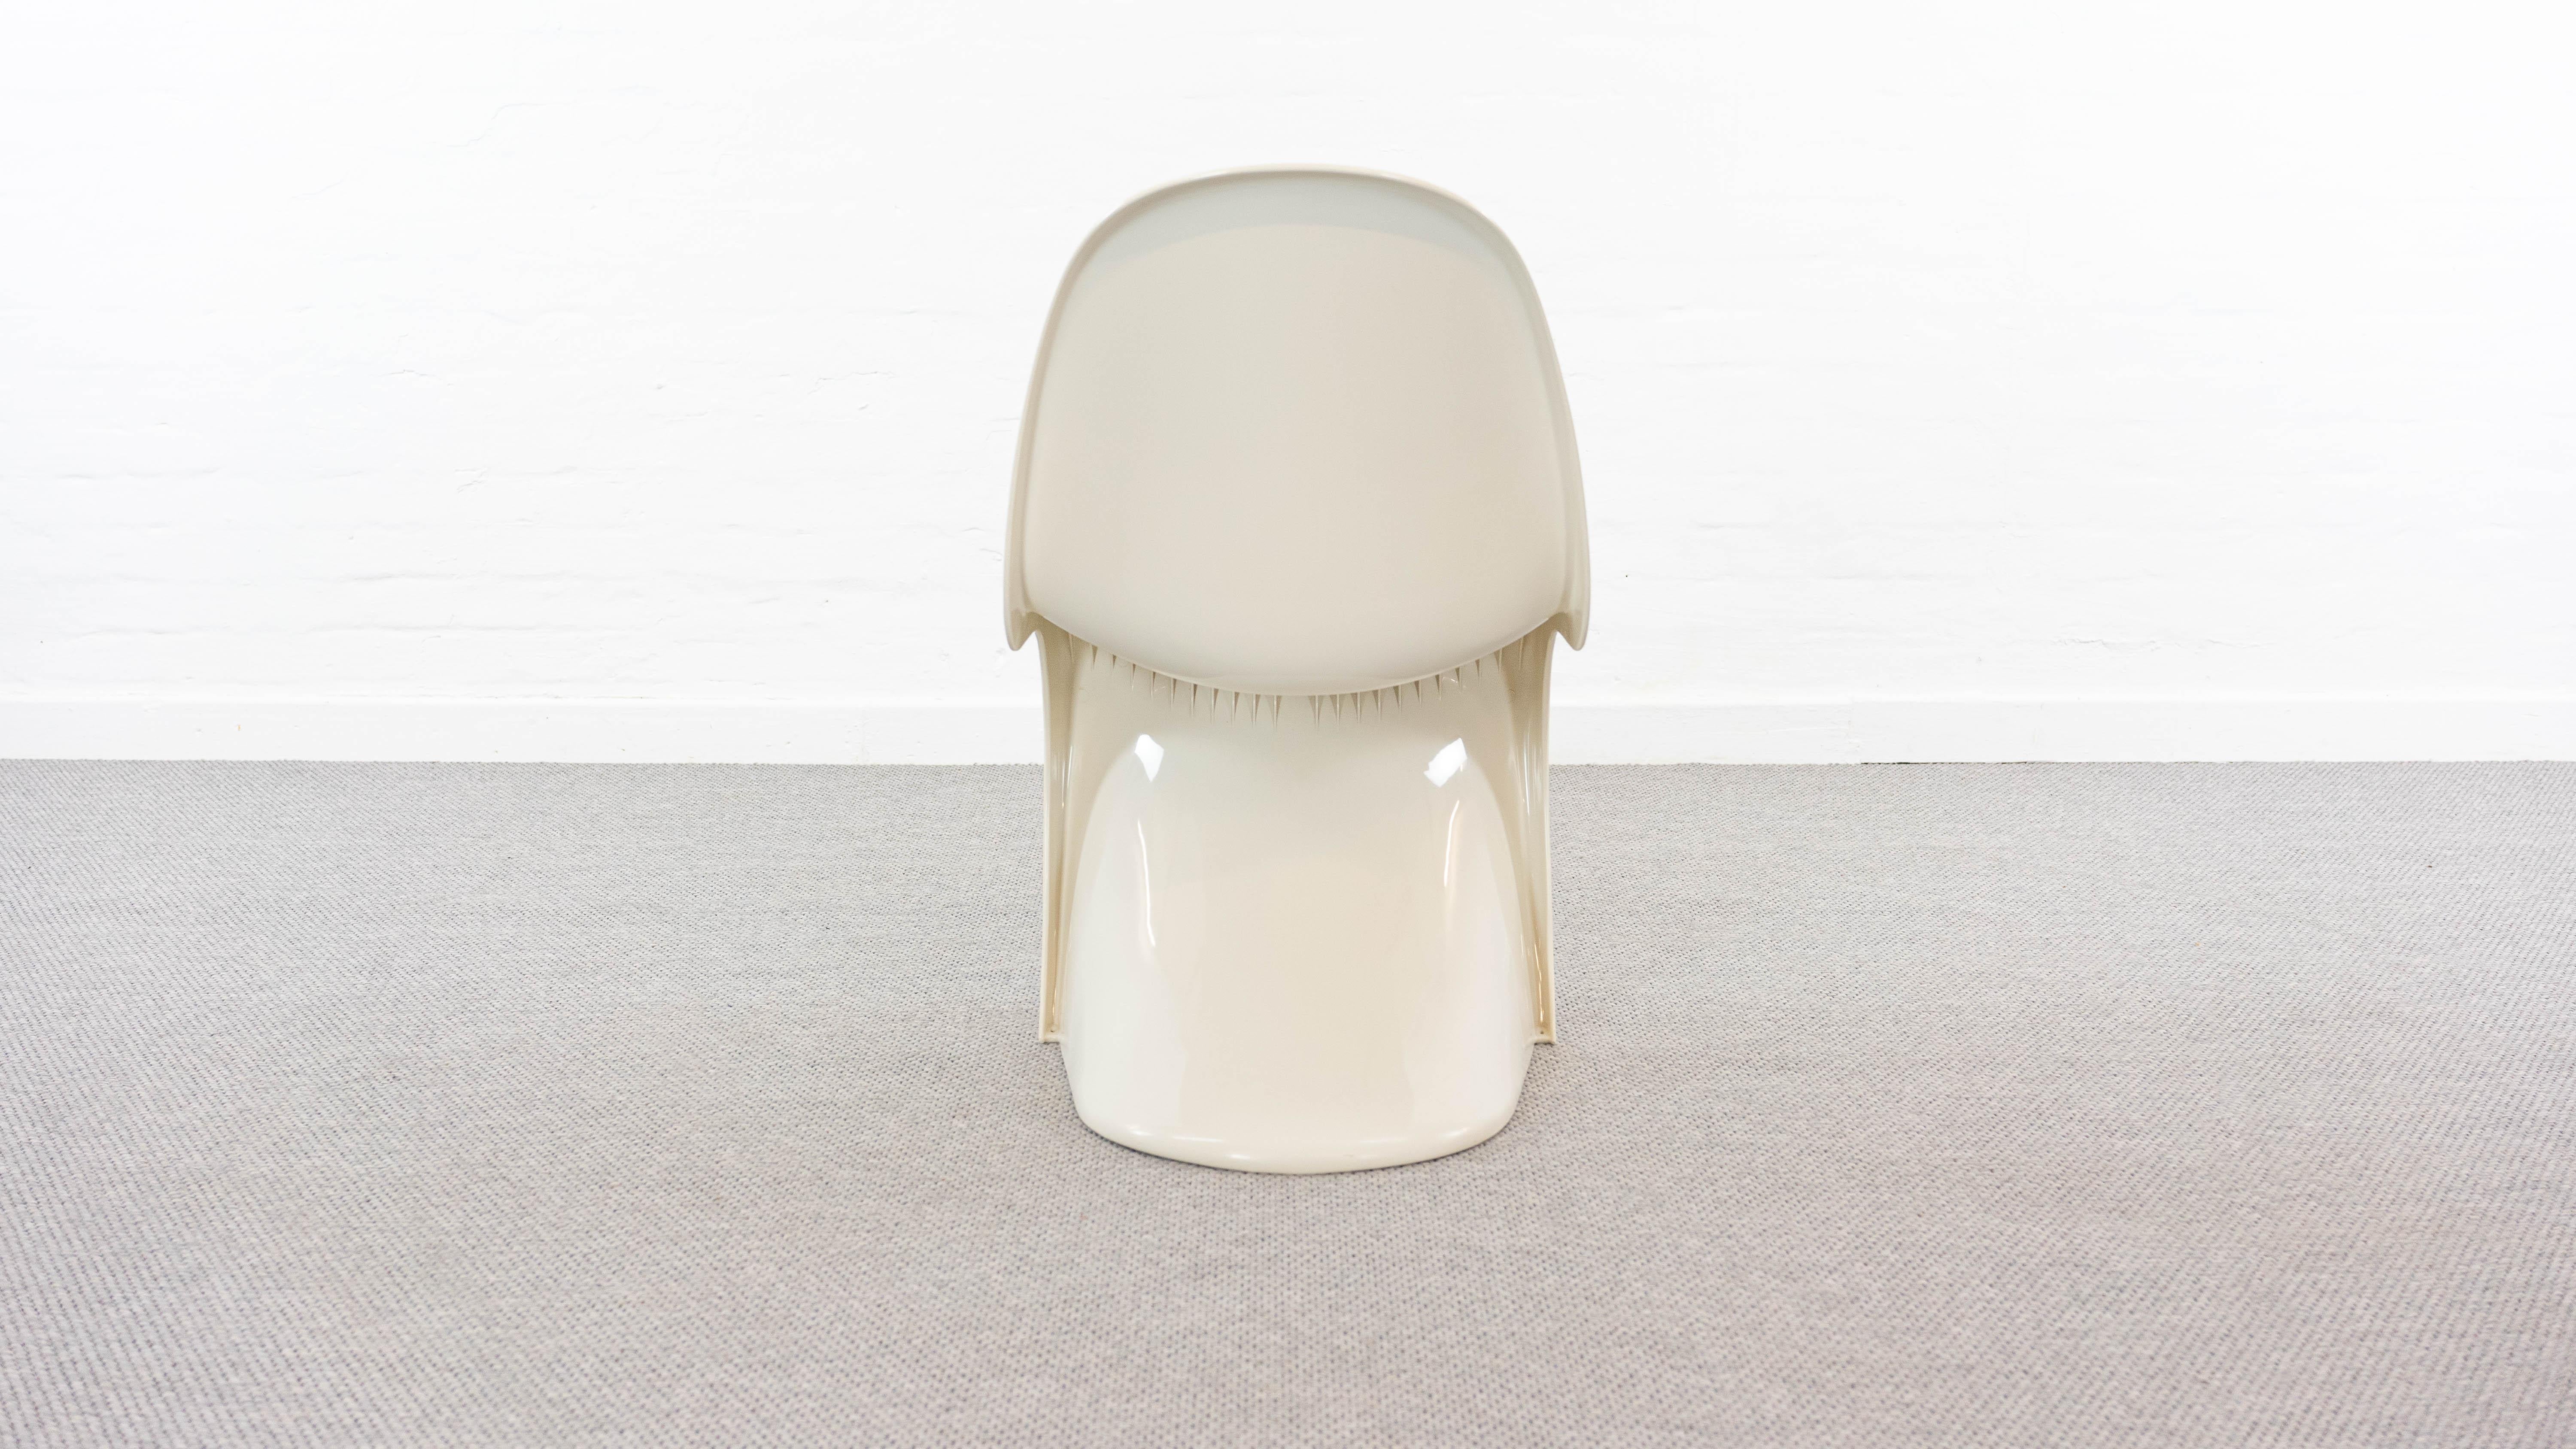 Late 20th Century Panton Chair in White by Verner Panton for Fehlbaum / Herman Miller 1979